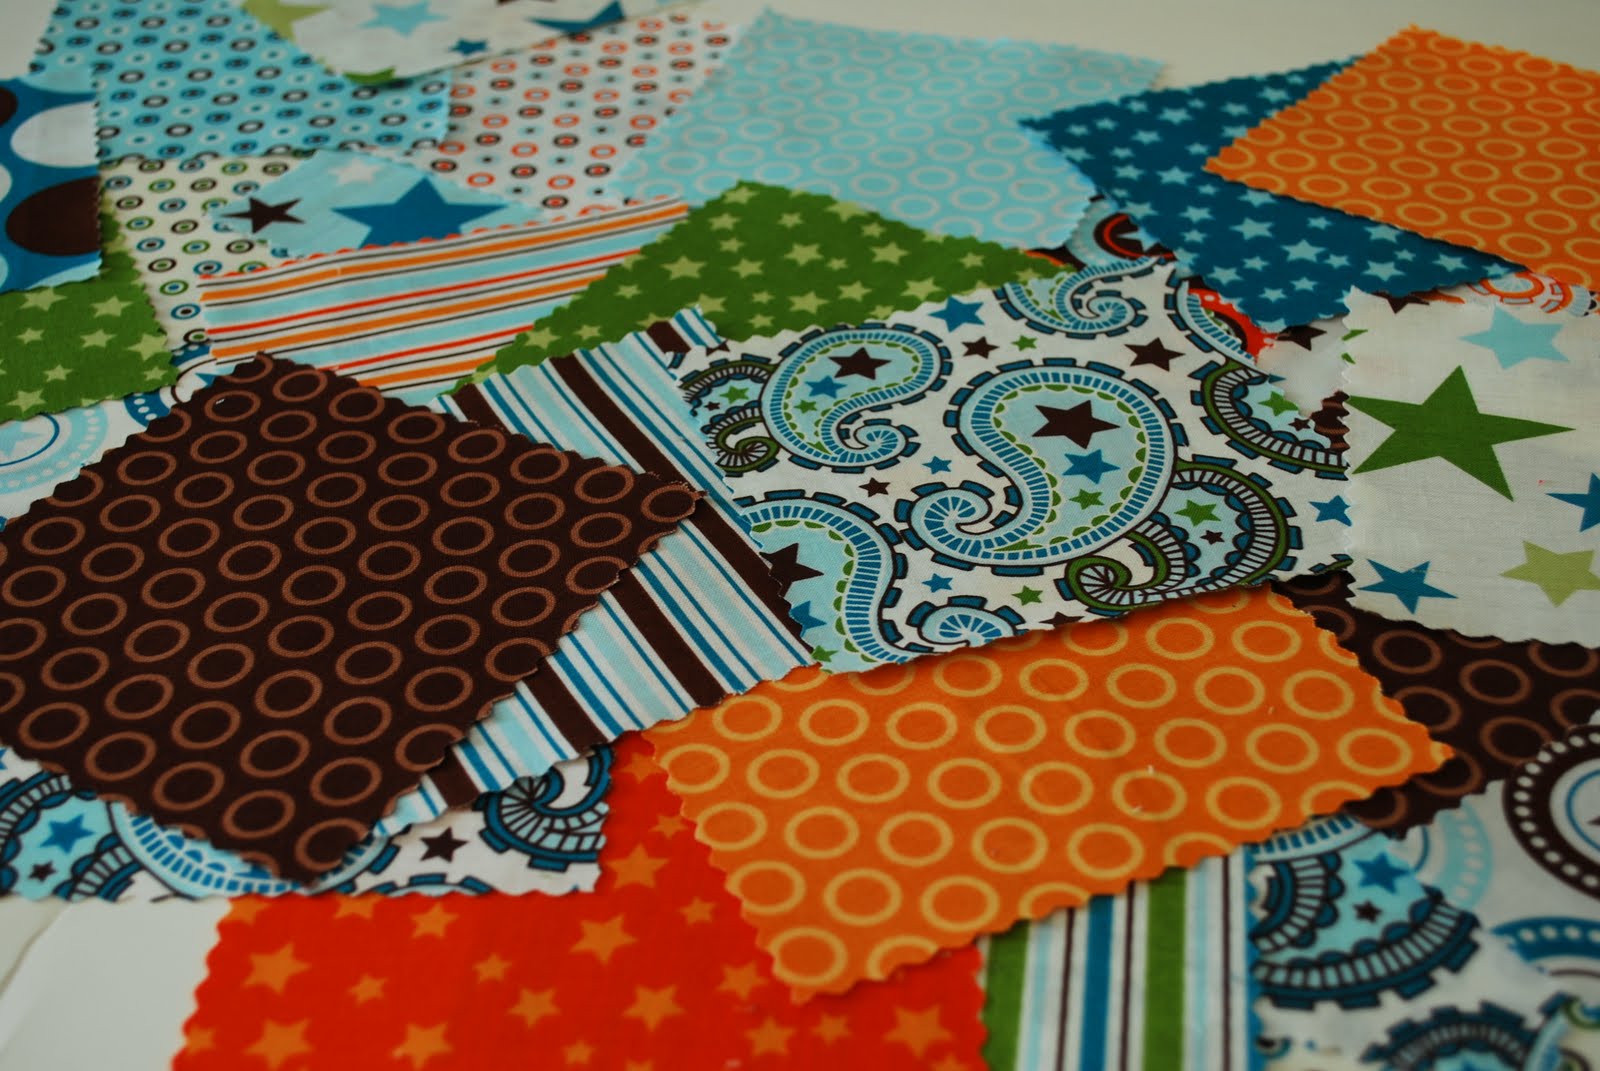 Charm Pack Quilt Patterns